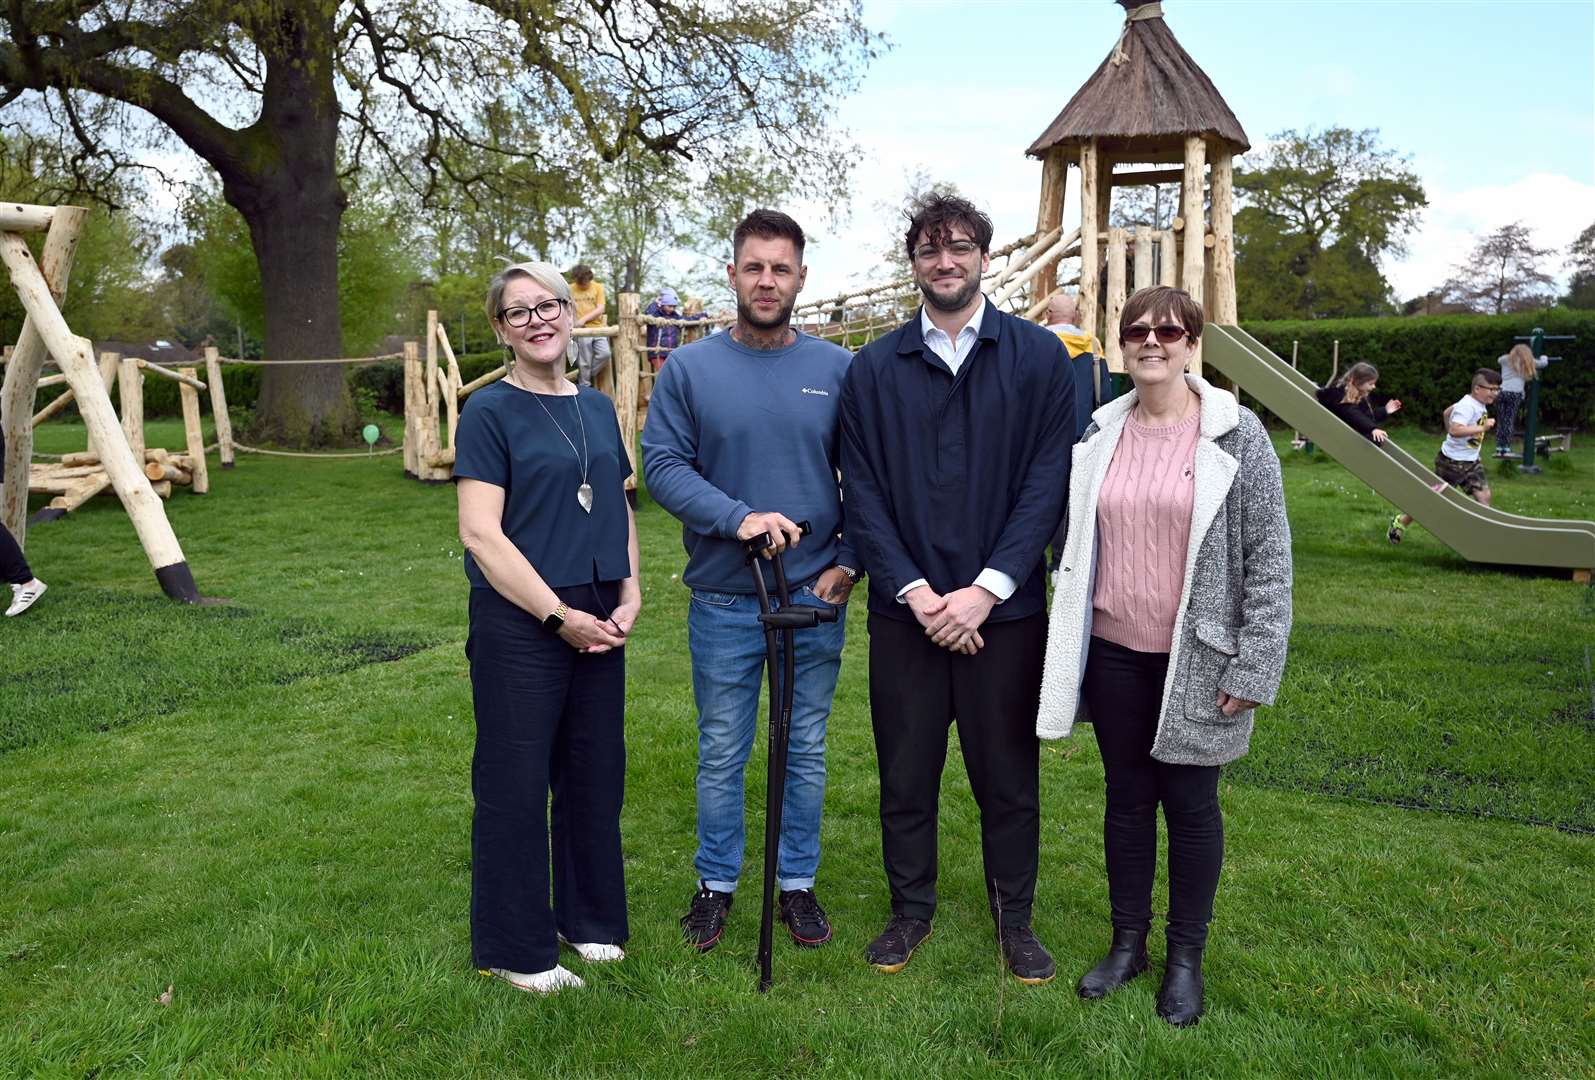 Official opening of Gaywood Community play park. From left to right Jo Rust, Ben Tansley, Henry Bowlby Flights of Fantasy, and Aydee Dickens